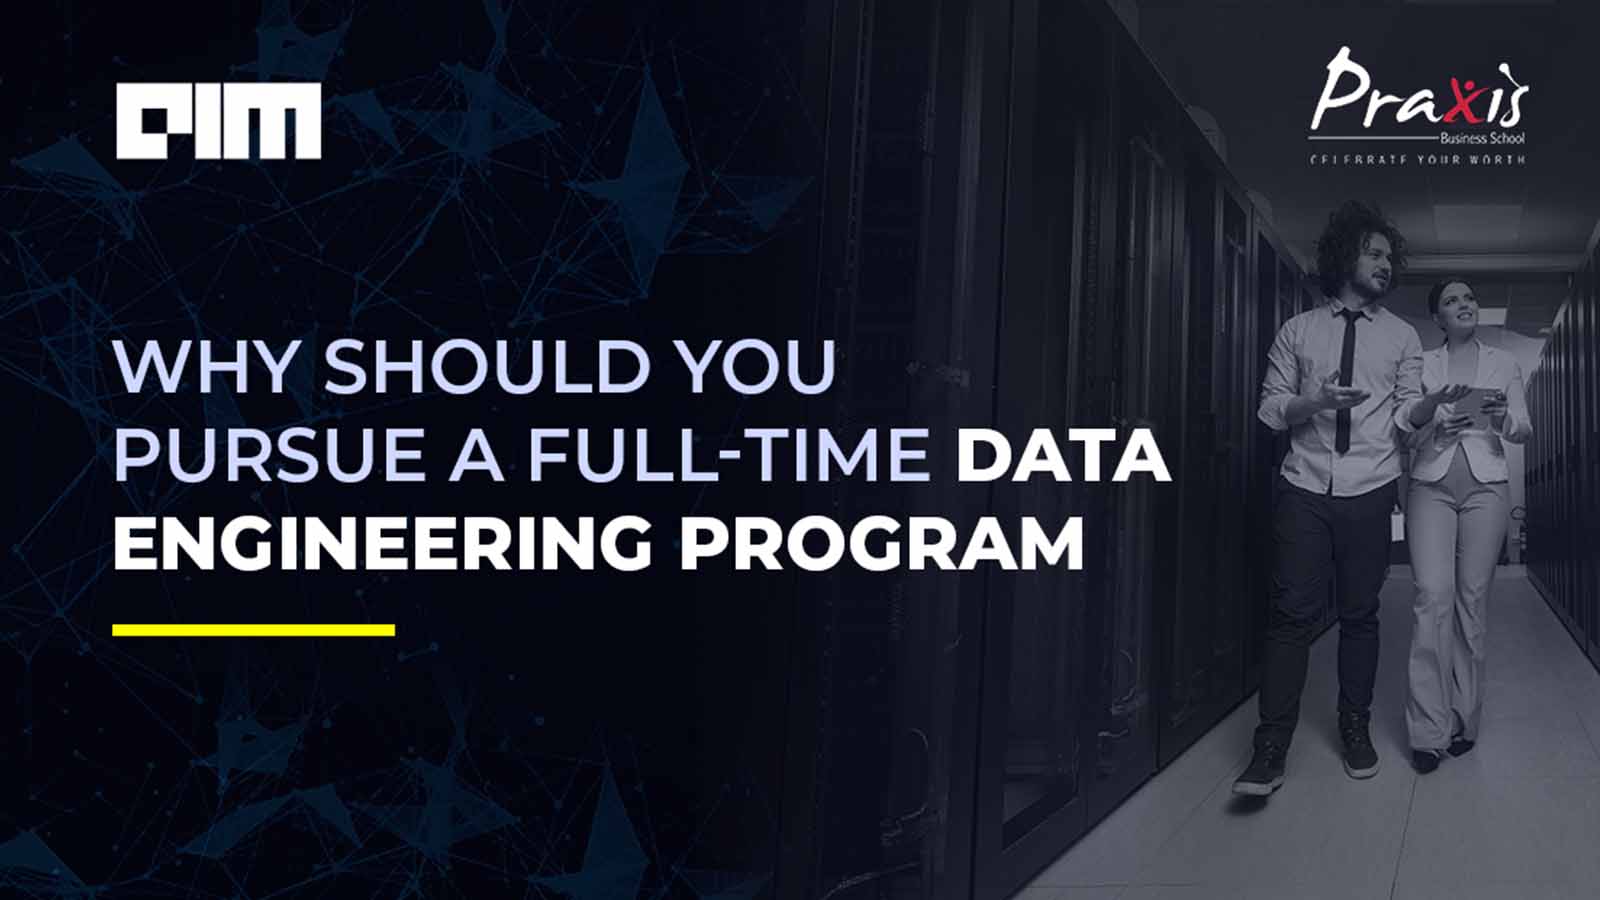 Praxis Launches Its Full-Time Data Engineering Program